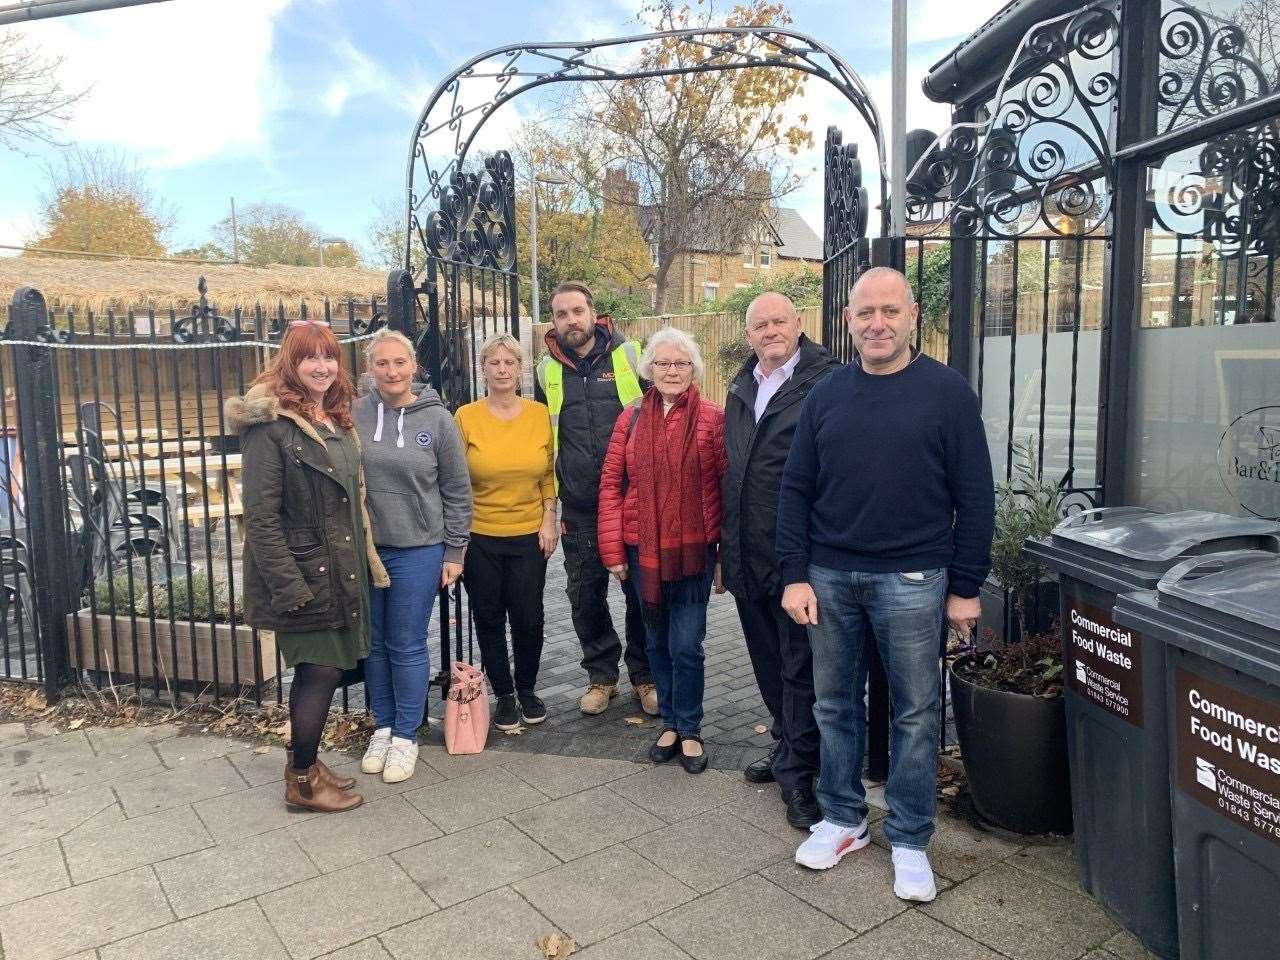 The Westgate Christmas Lights committee. Left to right: Mikala Morgan and Karen May, from Estrella Events, Jeanette Bell from Budget Bazaar, Michael Davis from MD Electrical, Christine Taylor, Ray Taylor From Fixology and Paul Glicko from Paul's Bistro